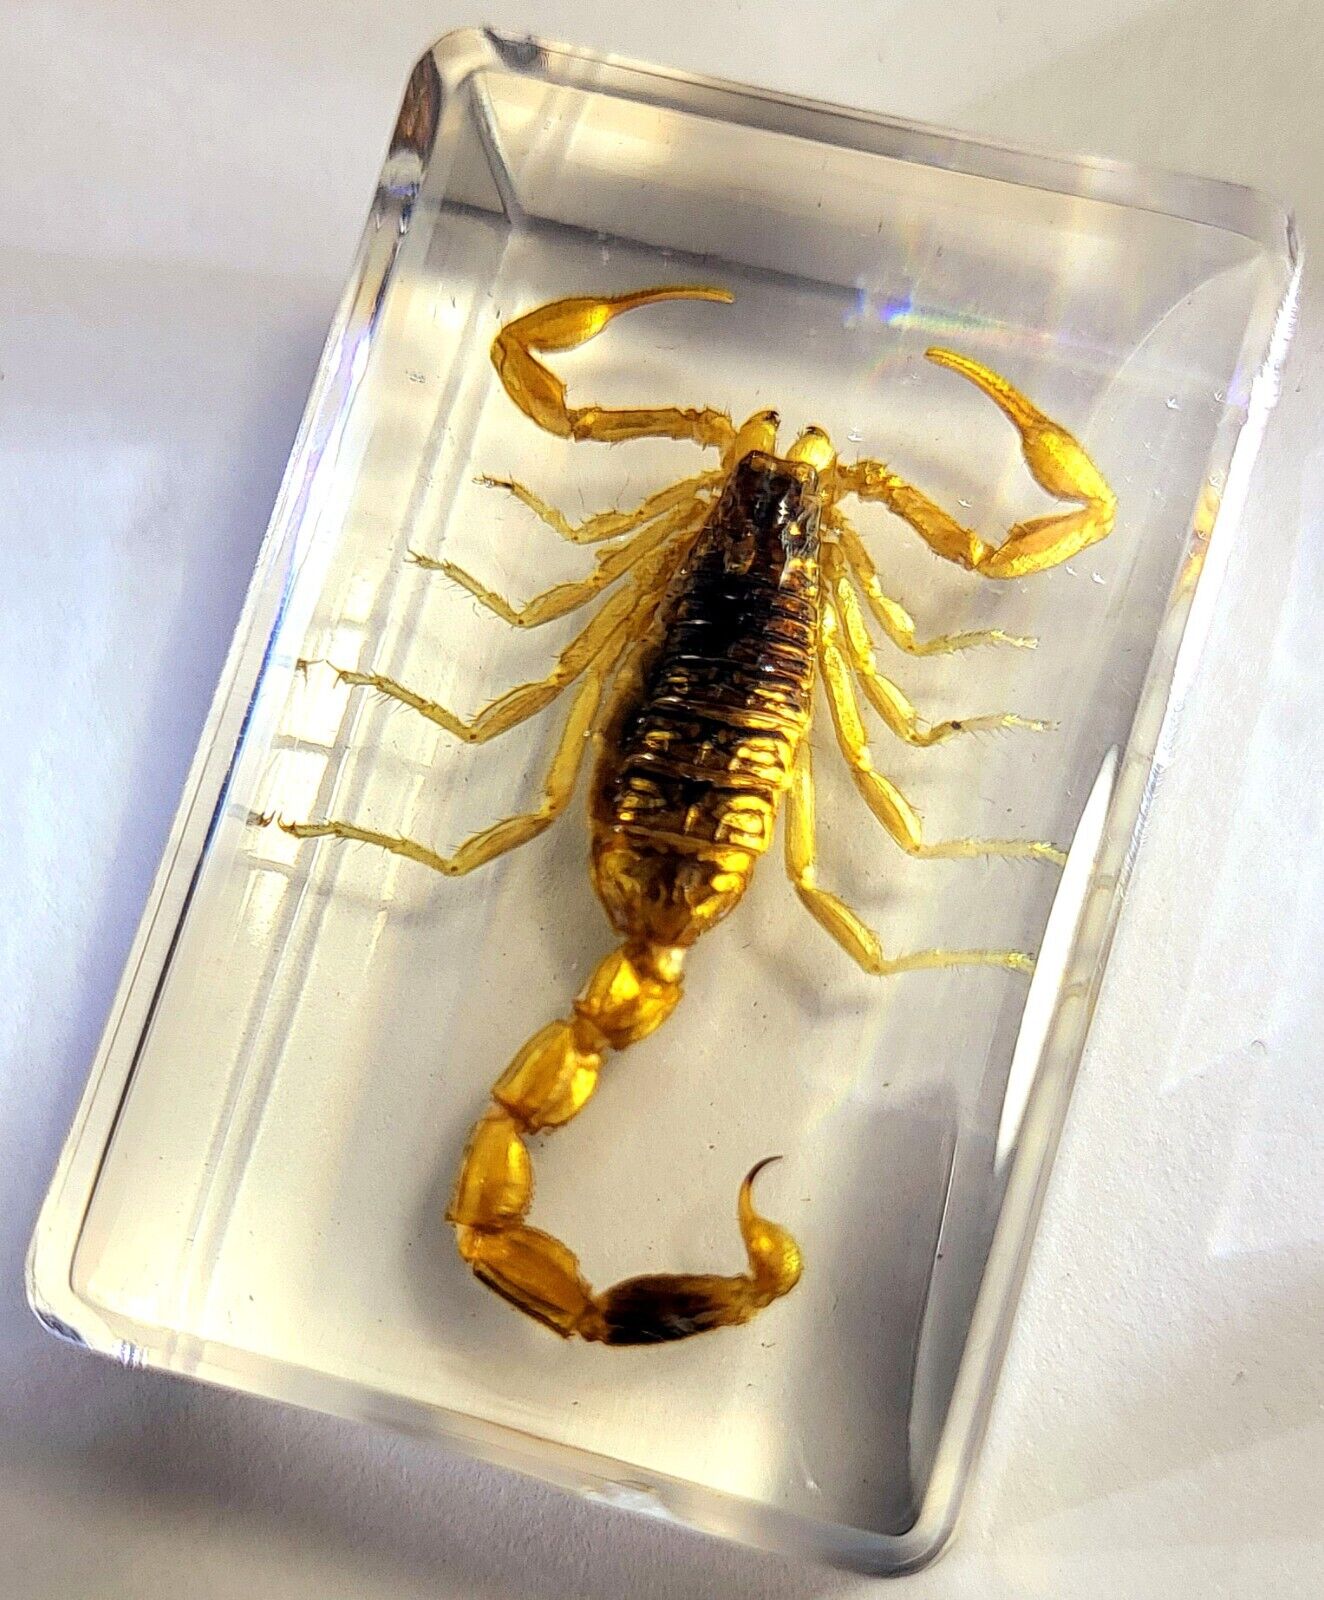 44mm Golden Scorpion in Clear Lucite Resin Science Education Collection Specimen